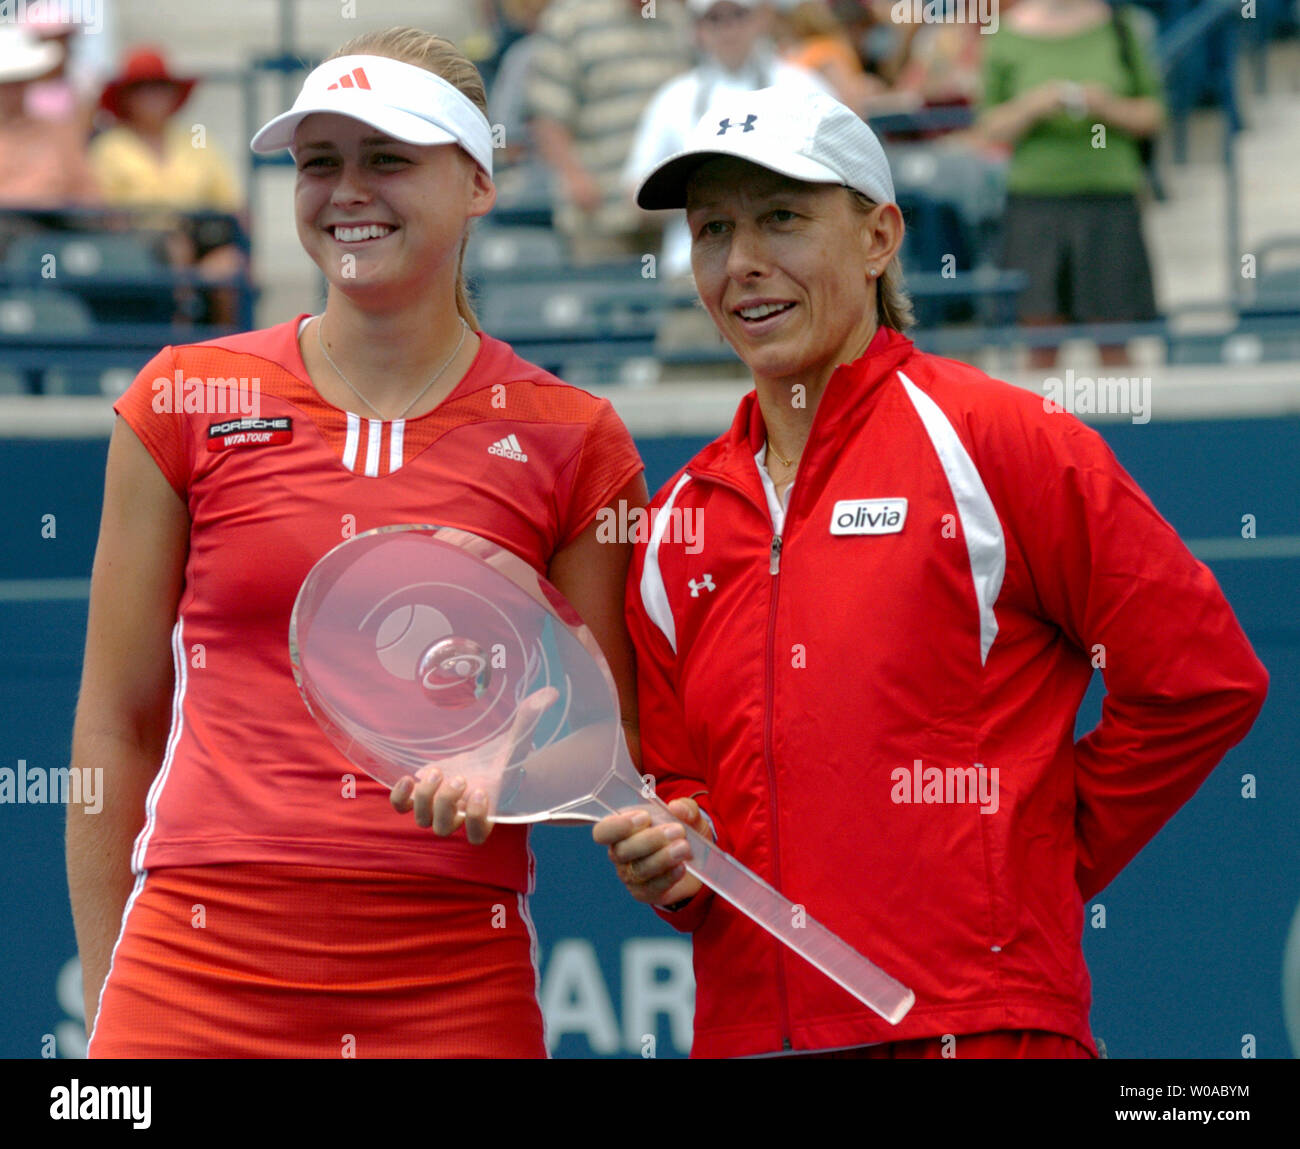 Tennis legend Martina Navratilova(right) and Anna-Lena Groenefeld pose with their trophy after defeating Conchita Martinez and Virginia Ruano Pascual in the doubles final at the Rogers Cup tournament at the Rexall Center August 21, 2005 in Toronto, Canada. Navratilova and Groenefeld rallied from a set down to win the match 5-7, 6-3, 6-4. (UPI Photo/Christine Chew) Stock Photo